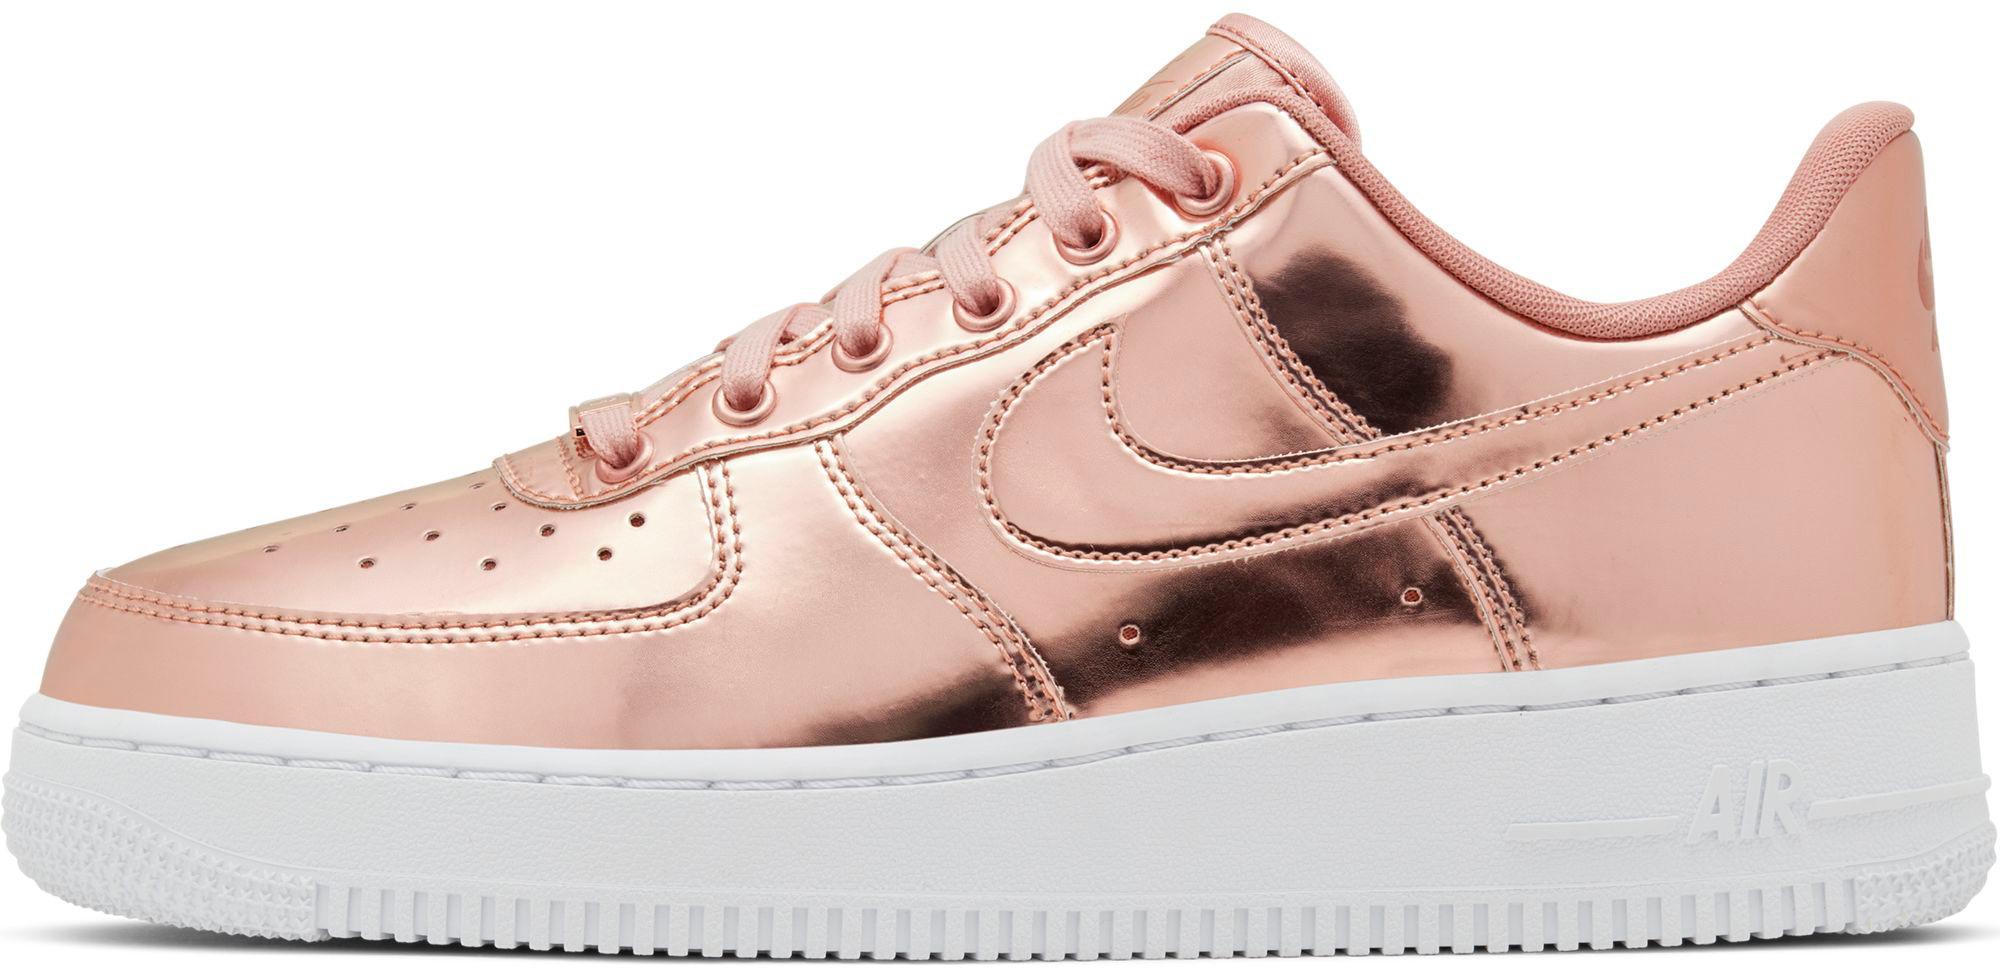 rose gold air force 1 high top